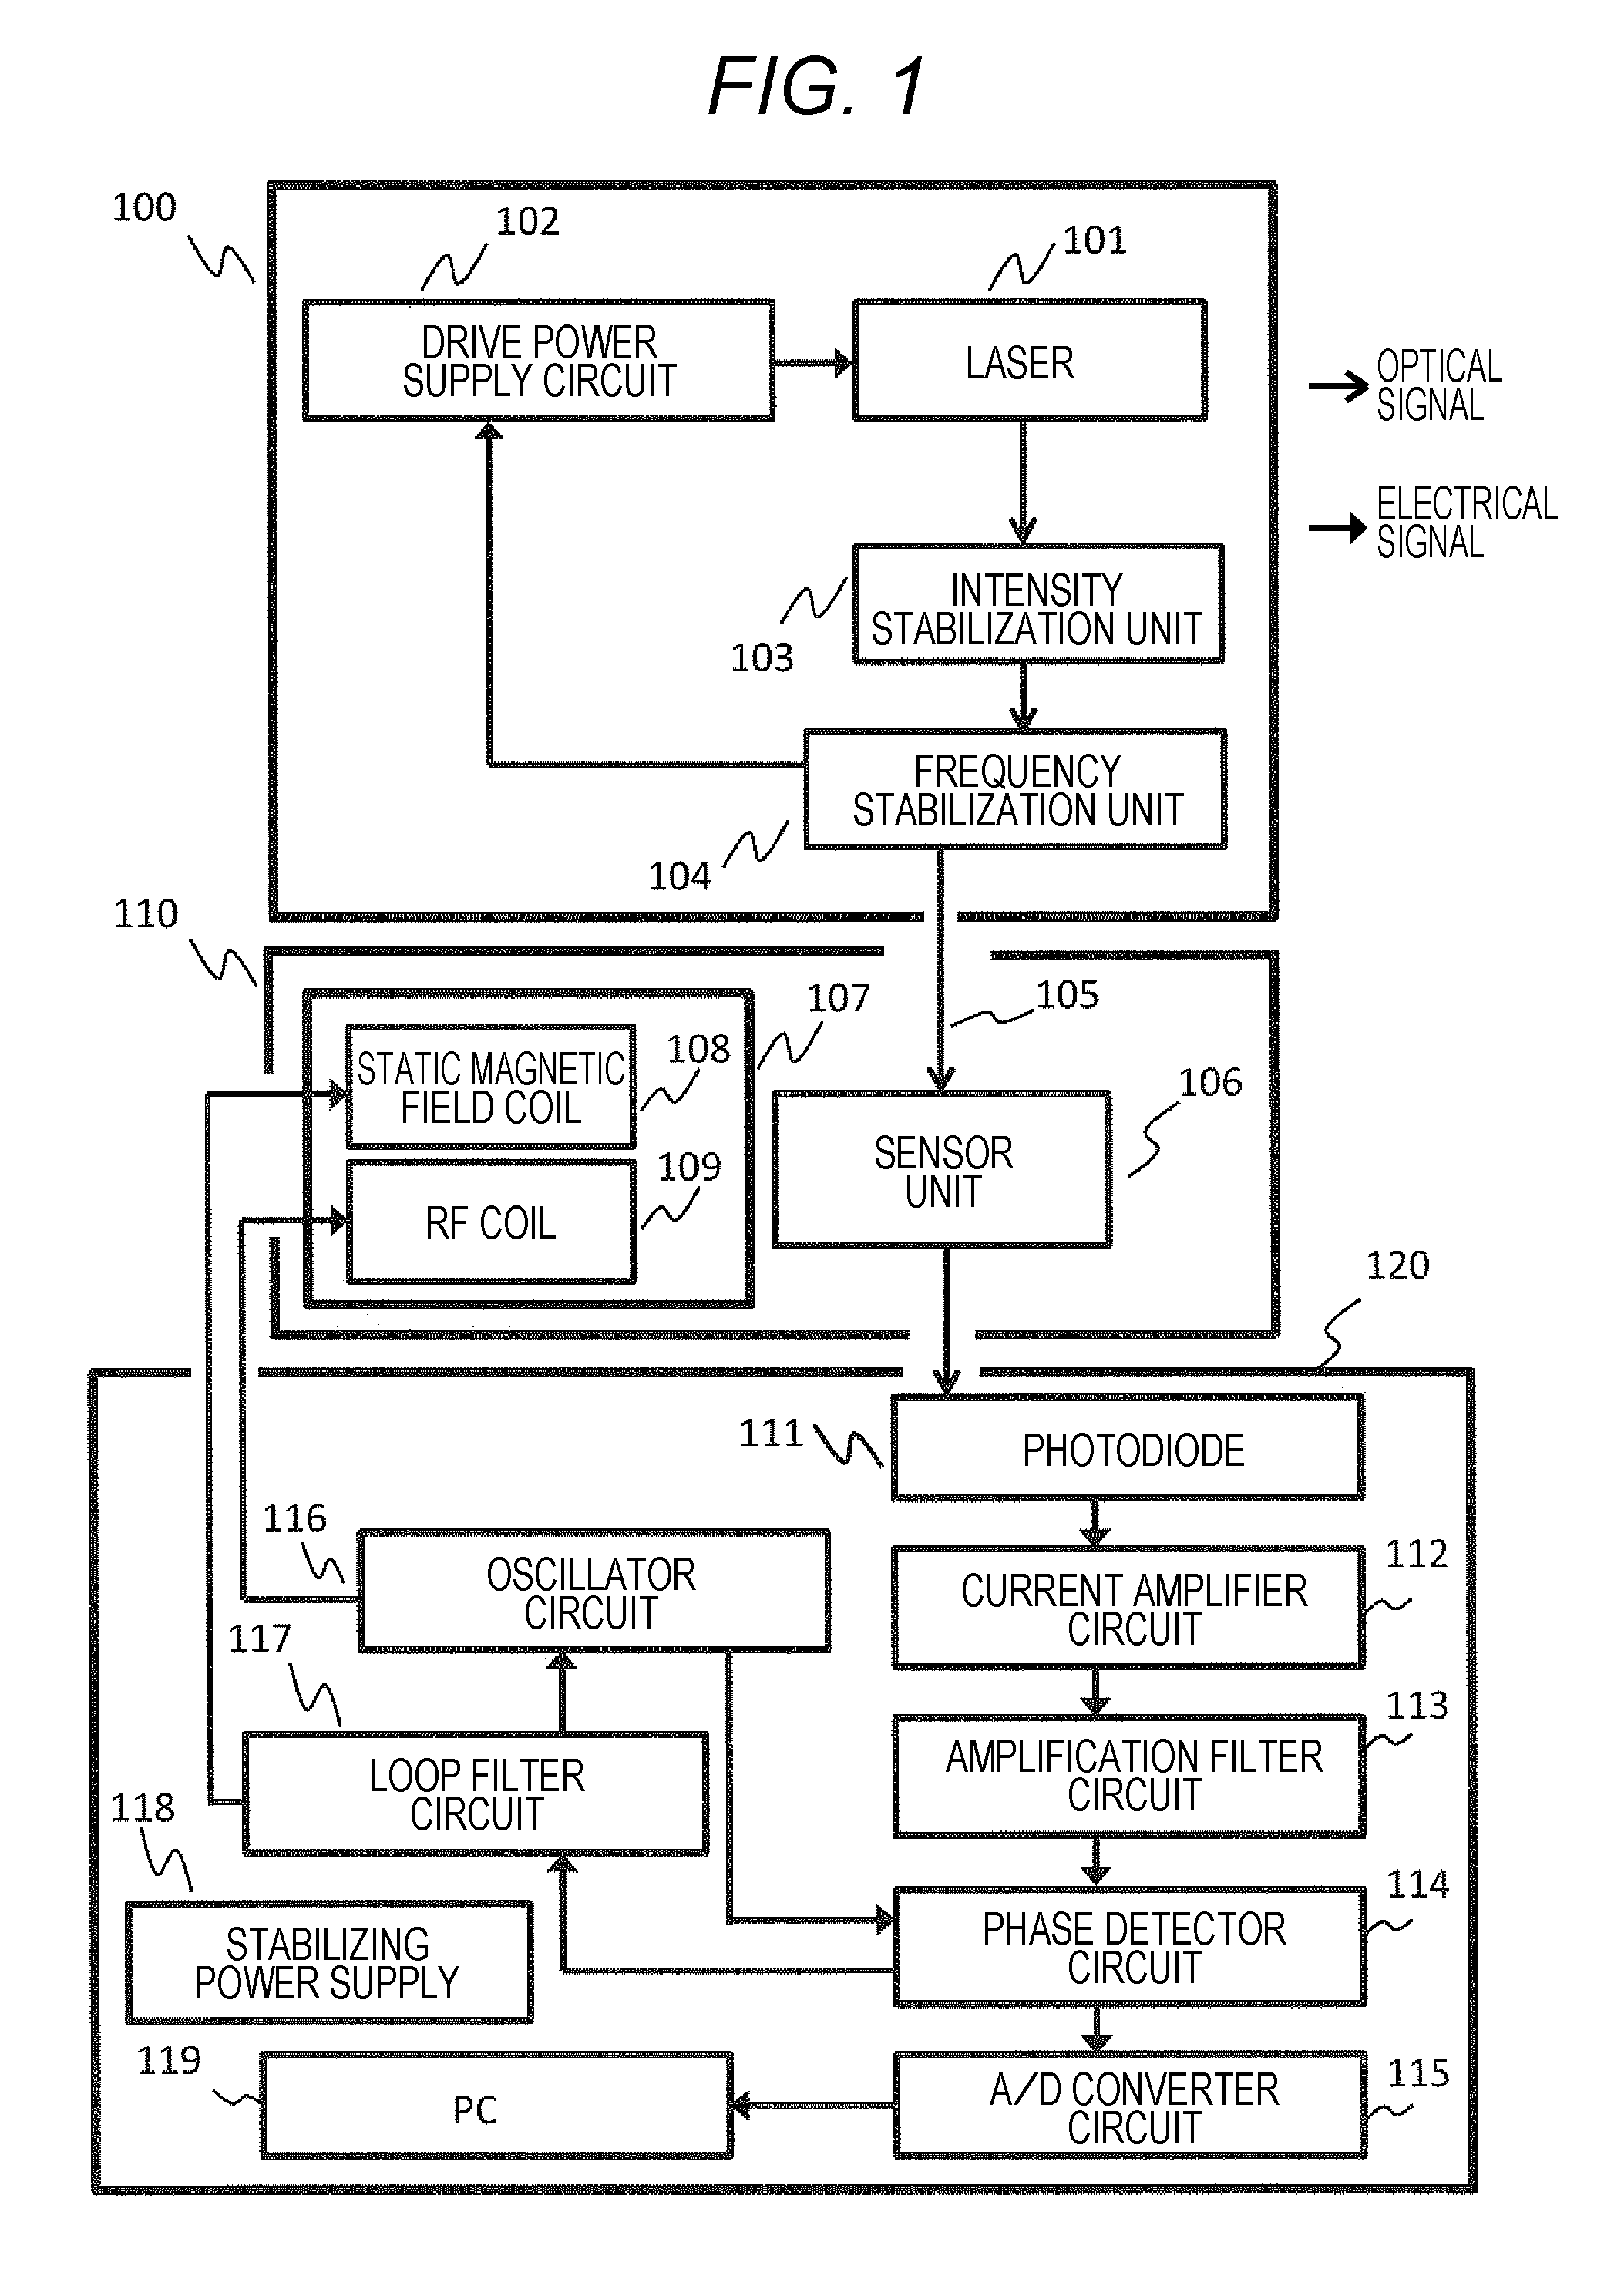 Magnetic field measurement device